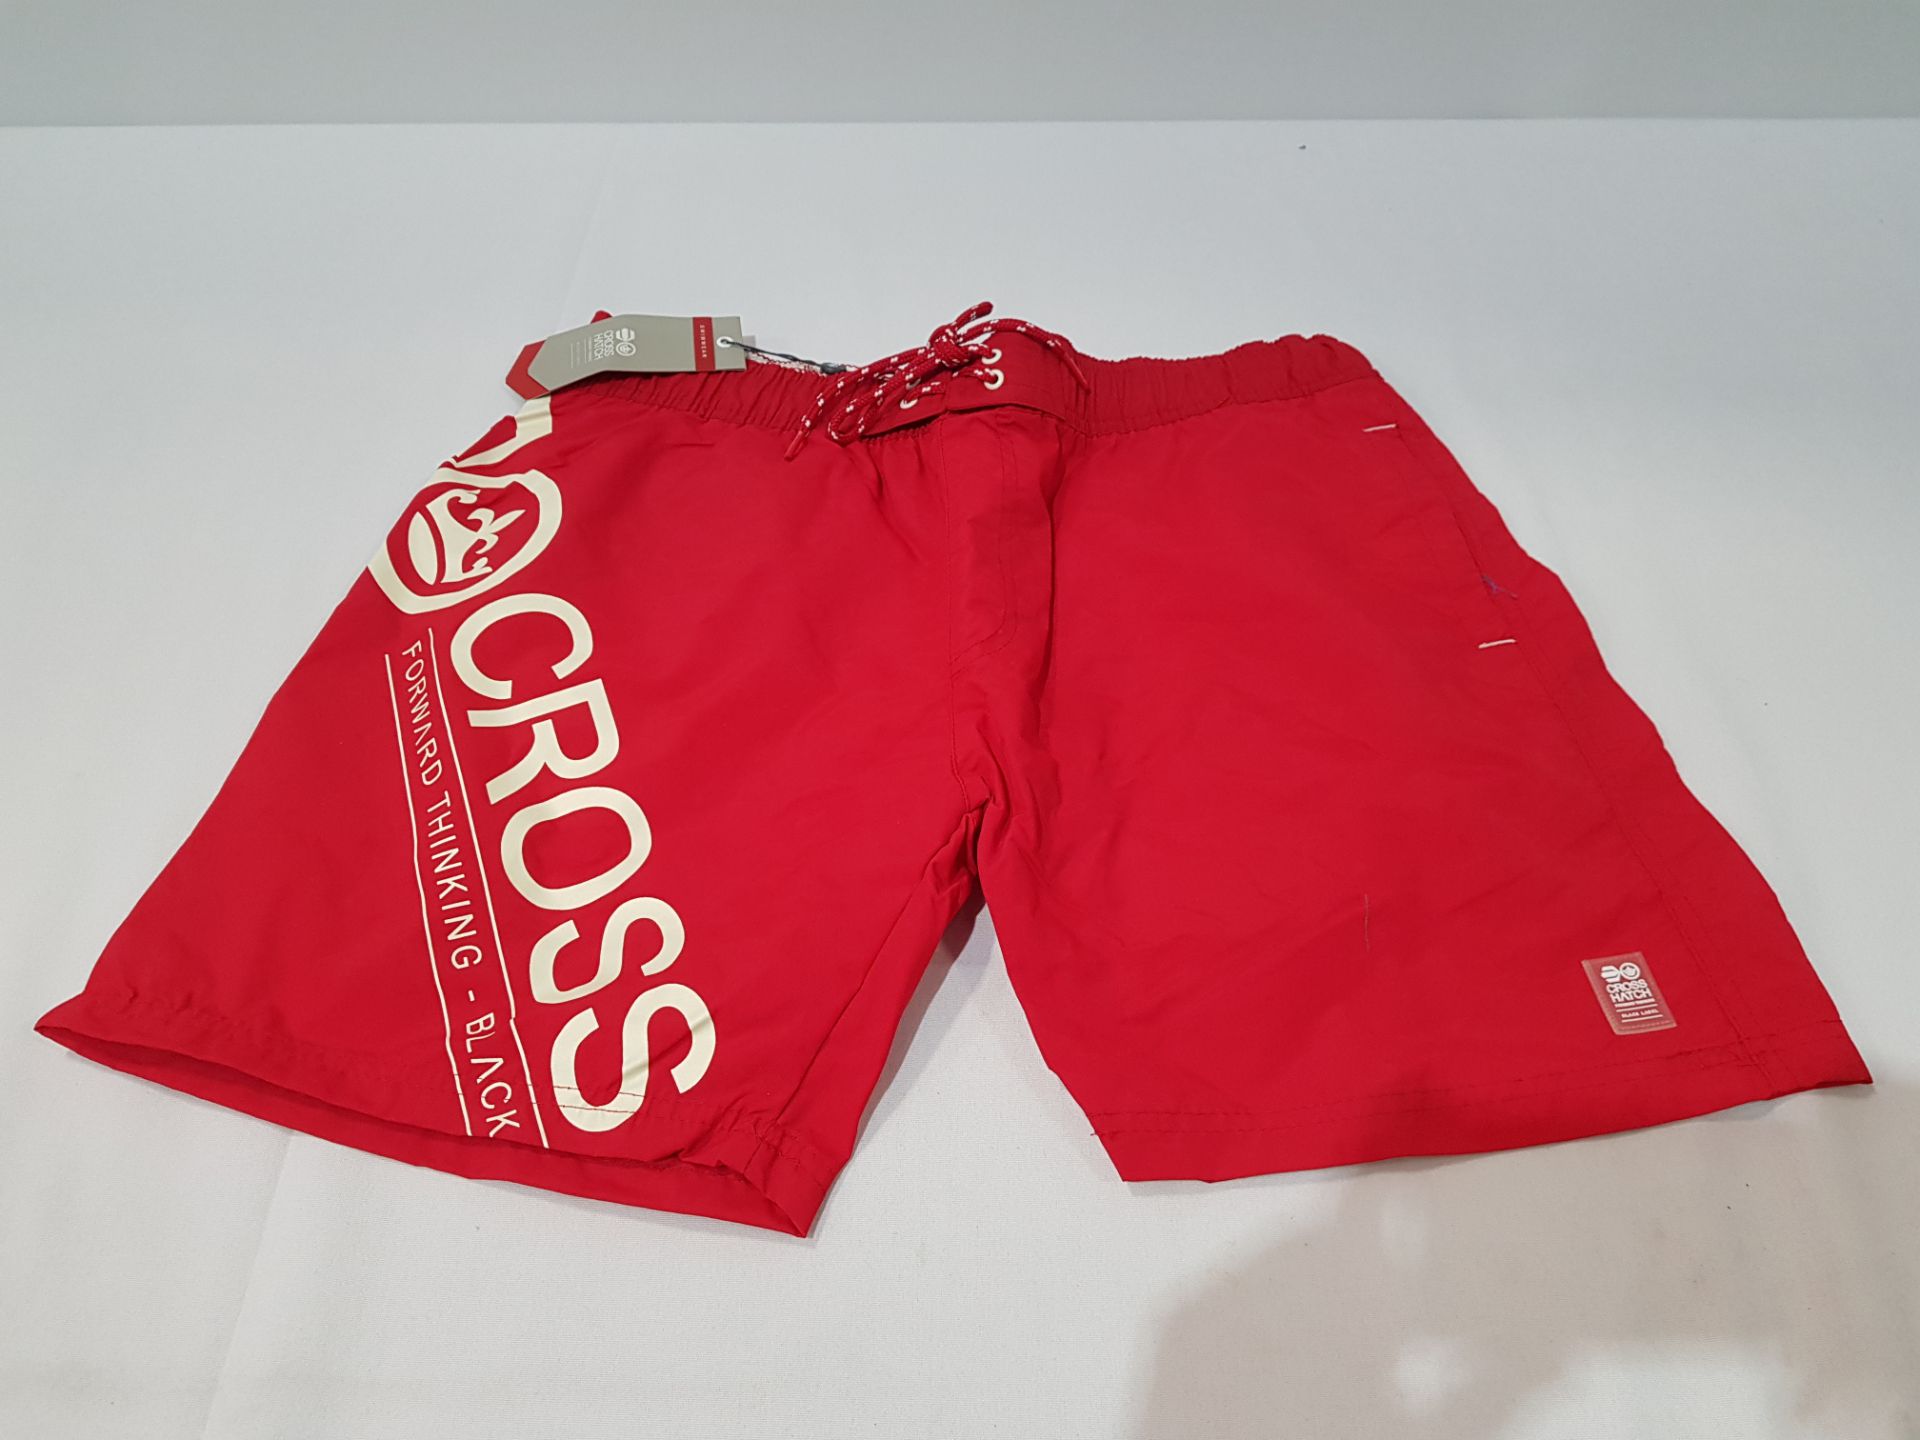 10 X BRAND NEW CROSSHATCH DESIGNER MESH LINED SWIM SHORTS WITH LOGO IN RED SIZE XL(RRP £25 EACH)